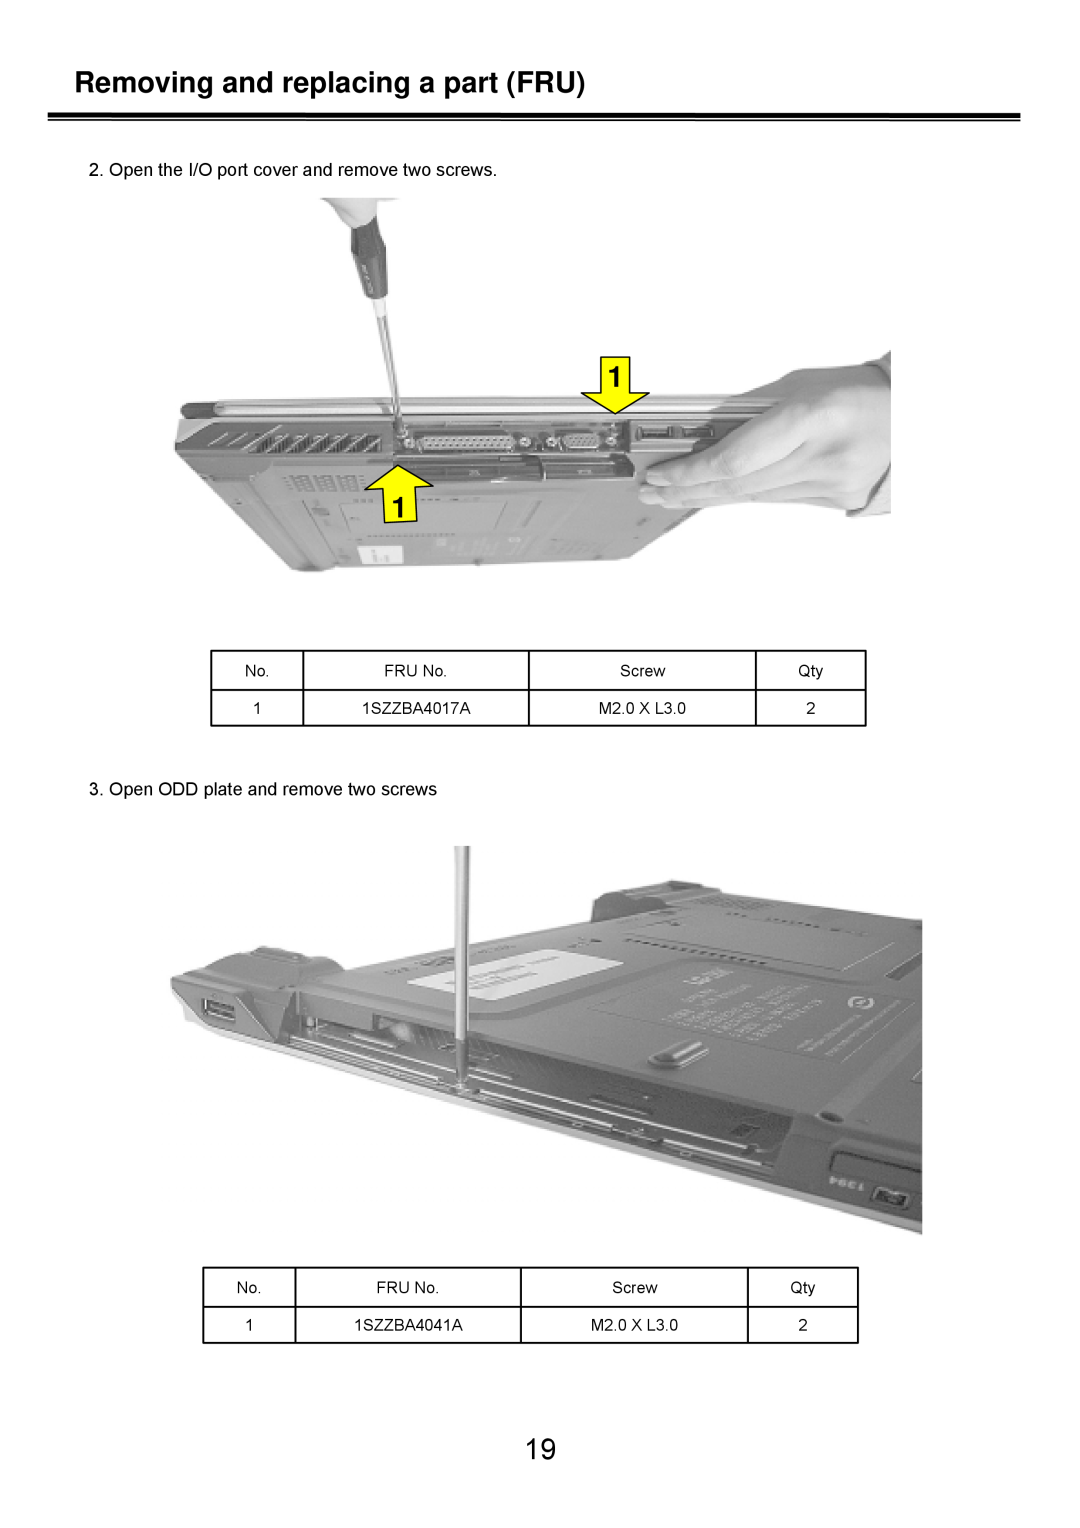 LG Electronics LS50 service manual Open the I/O port cover and remove two screws, Open ODD plate and remove two screws 